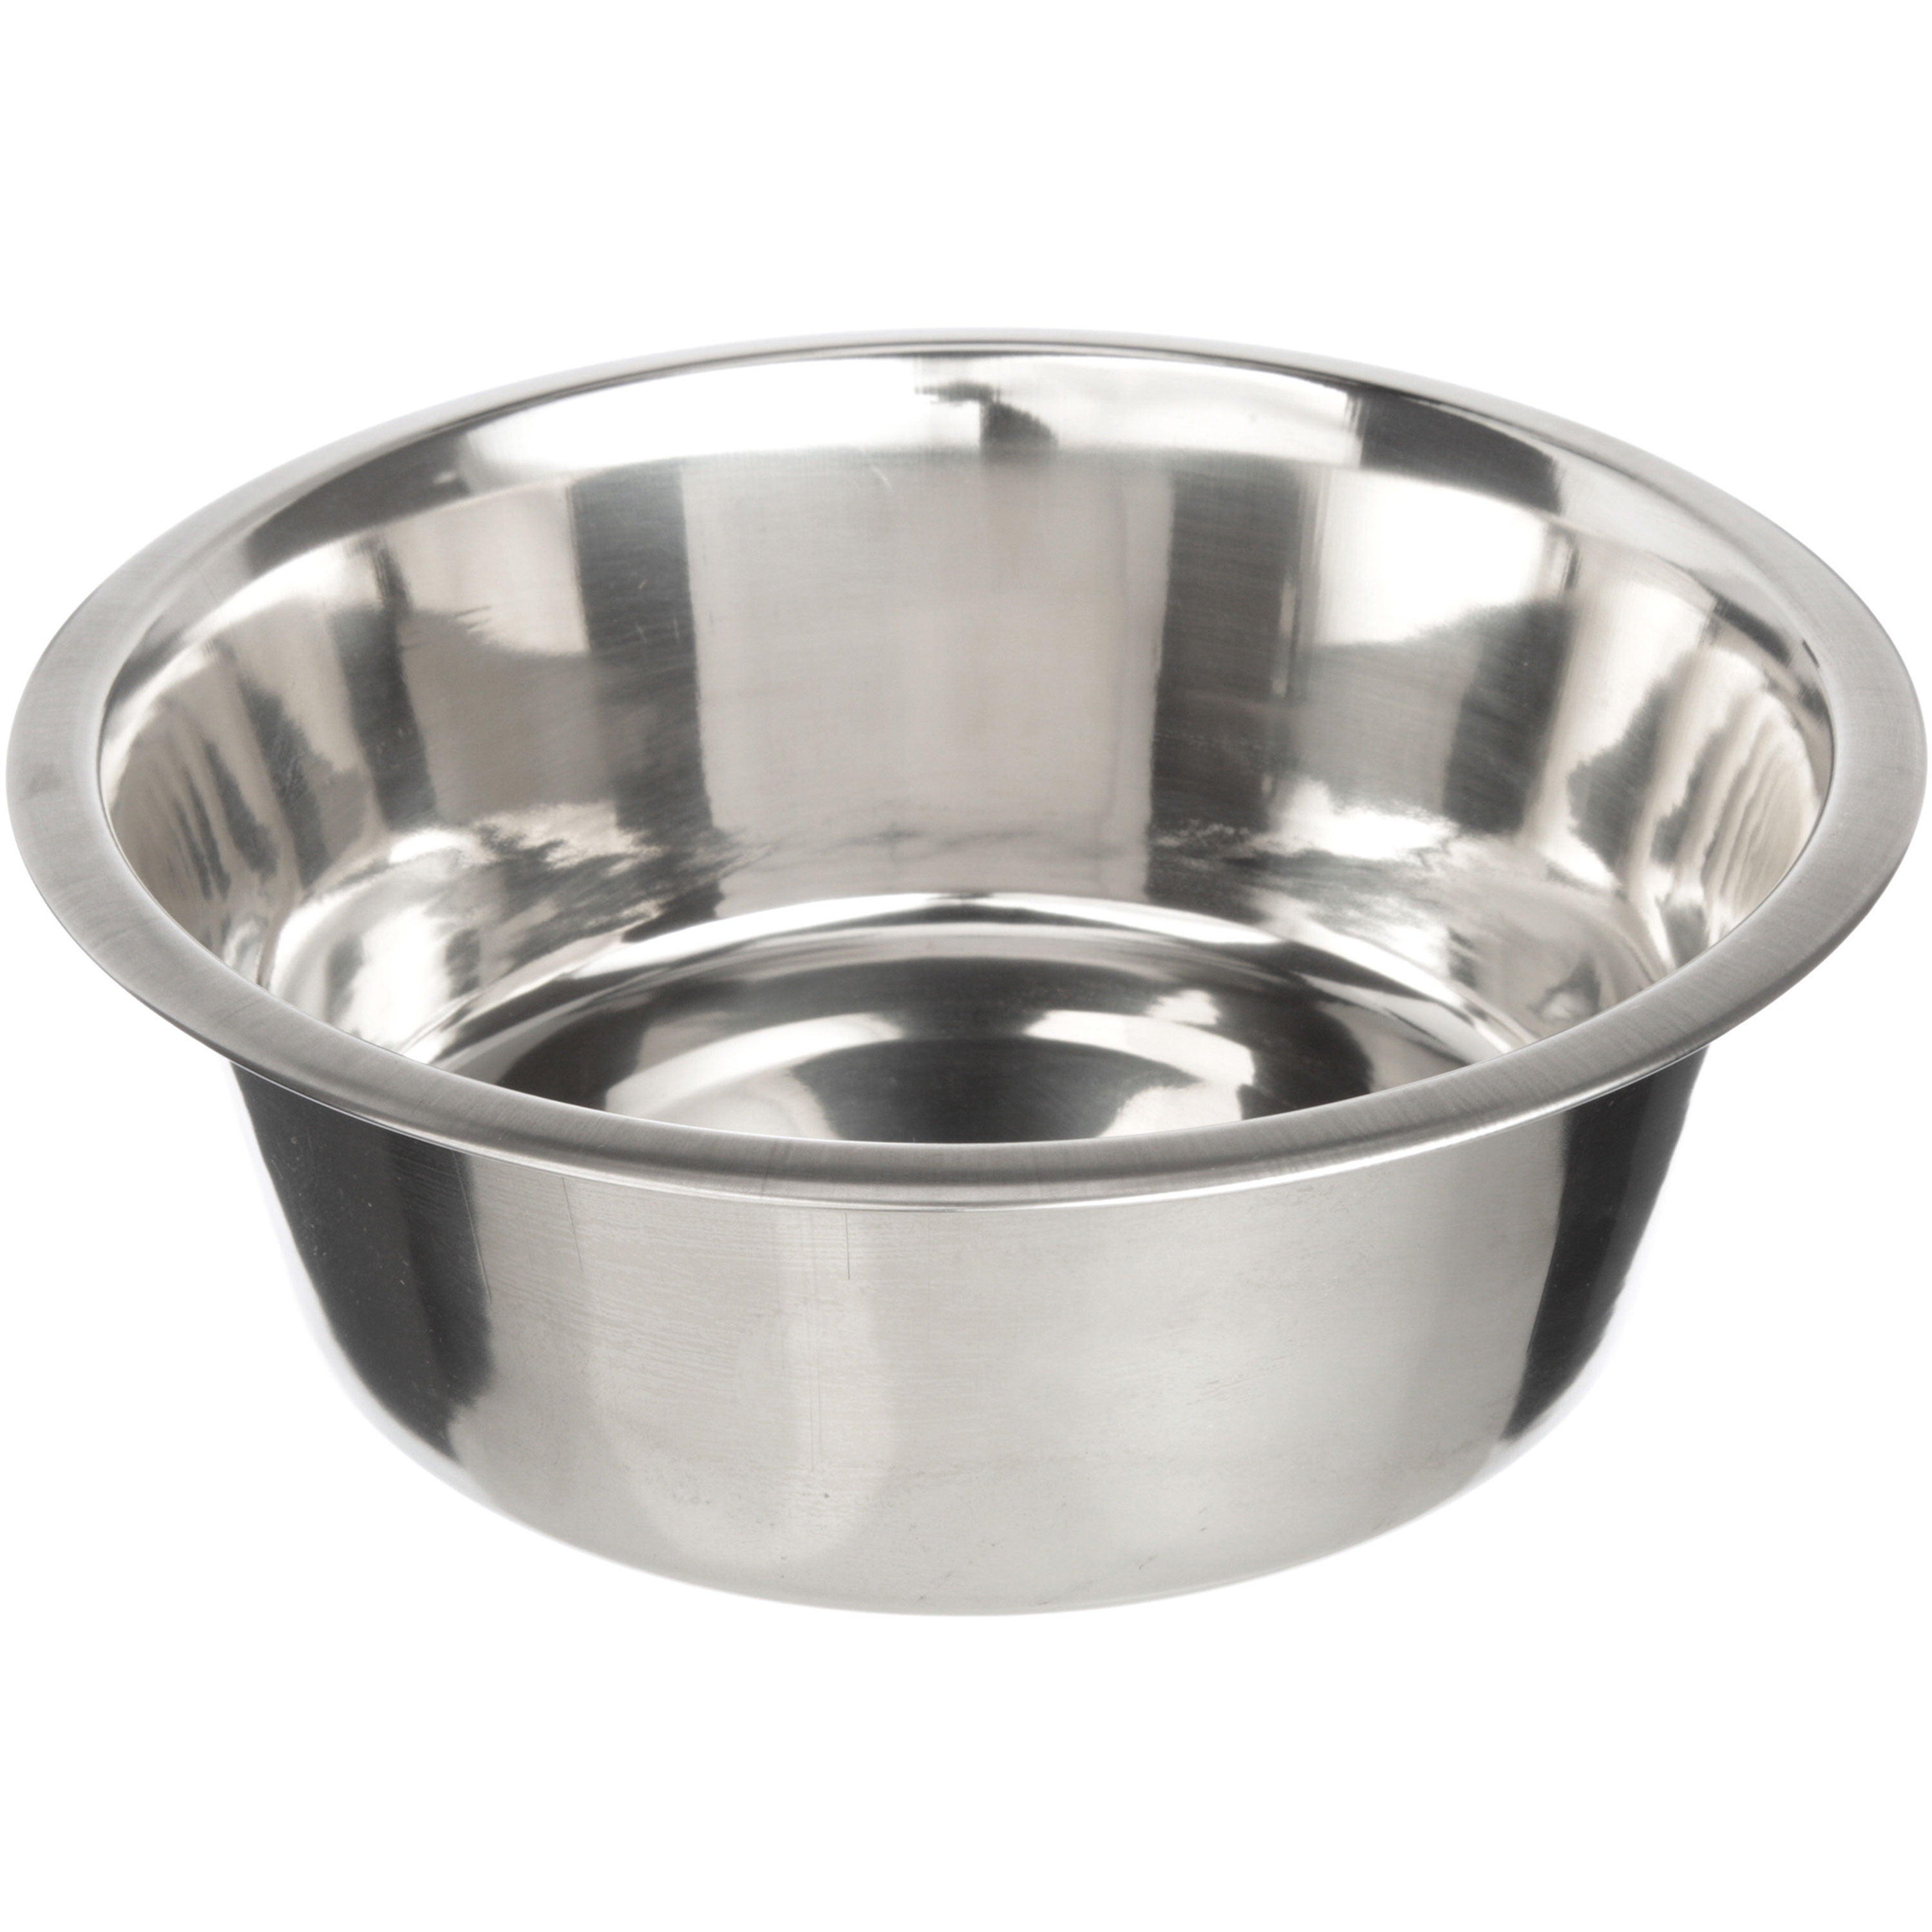 Neater Pets 56-oz Metal and Plastic Dog Bowl(s) with Stand (2